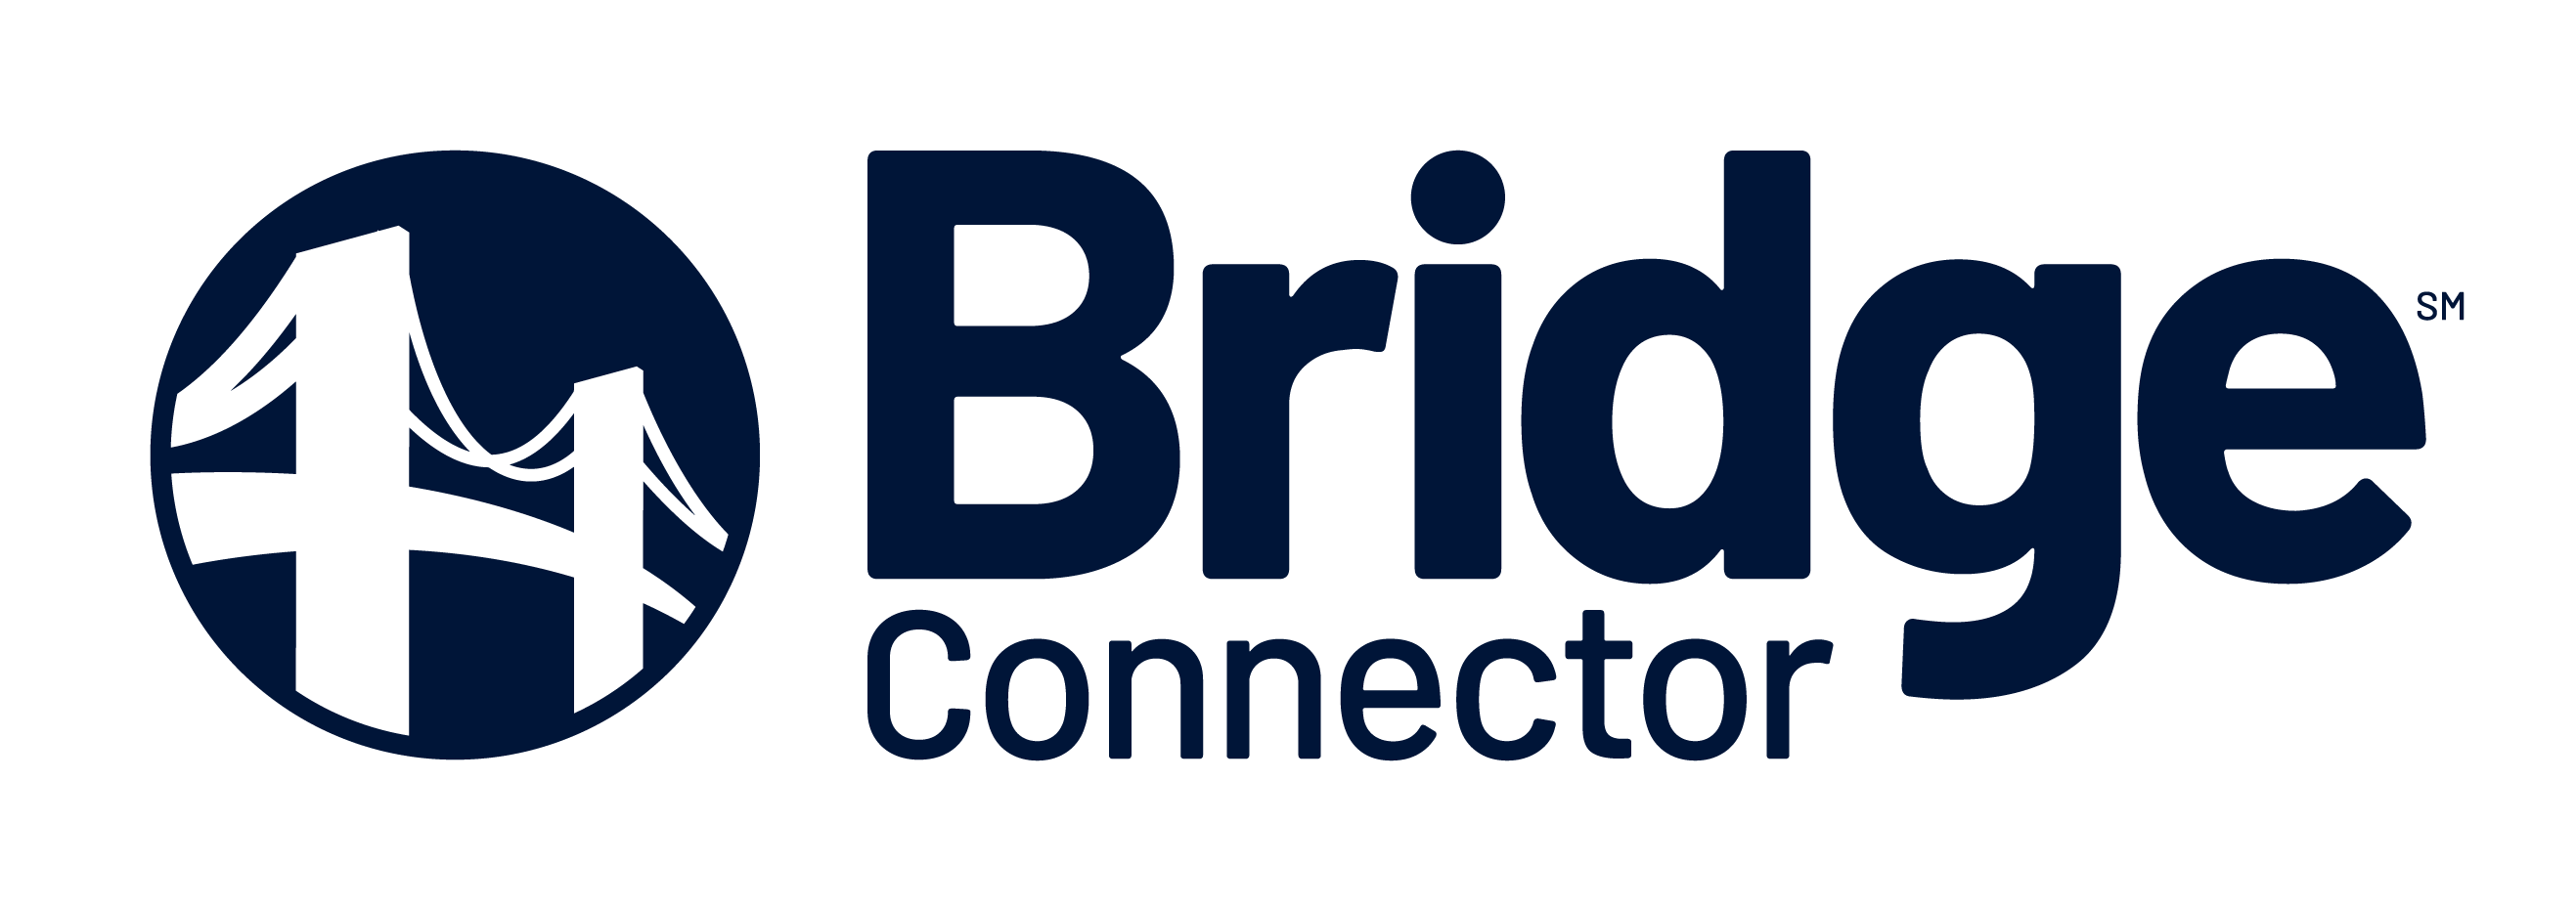 Bridge Connector Launches New Product Division Focusing on CRM Applications